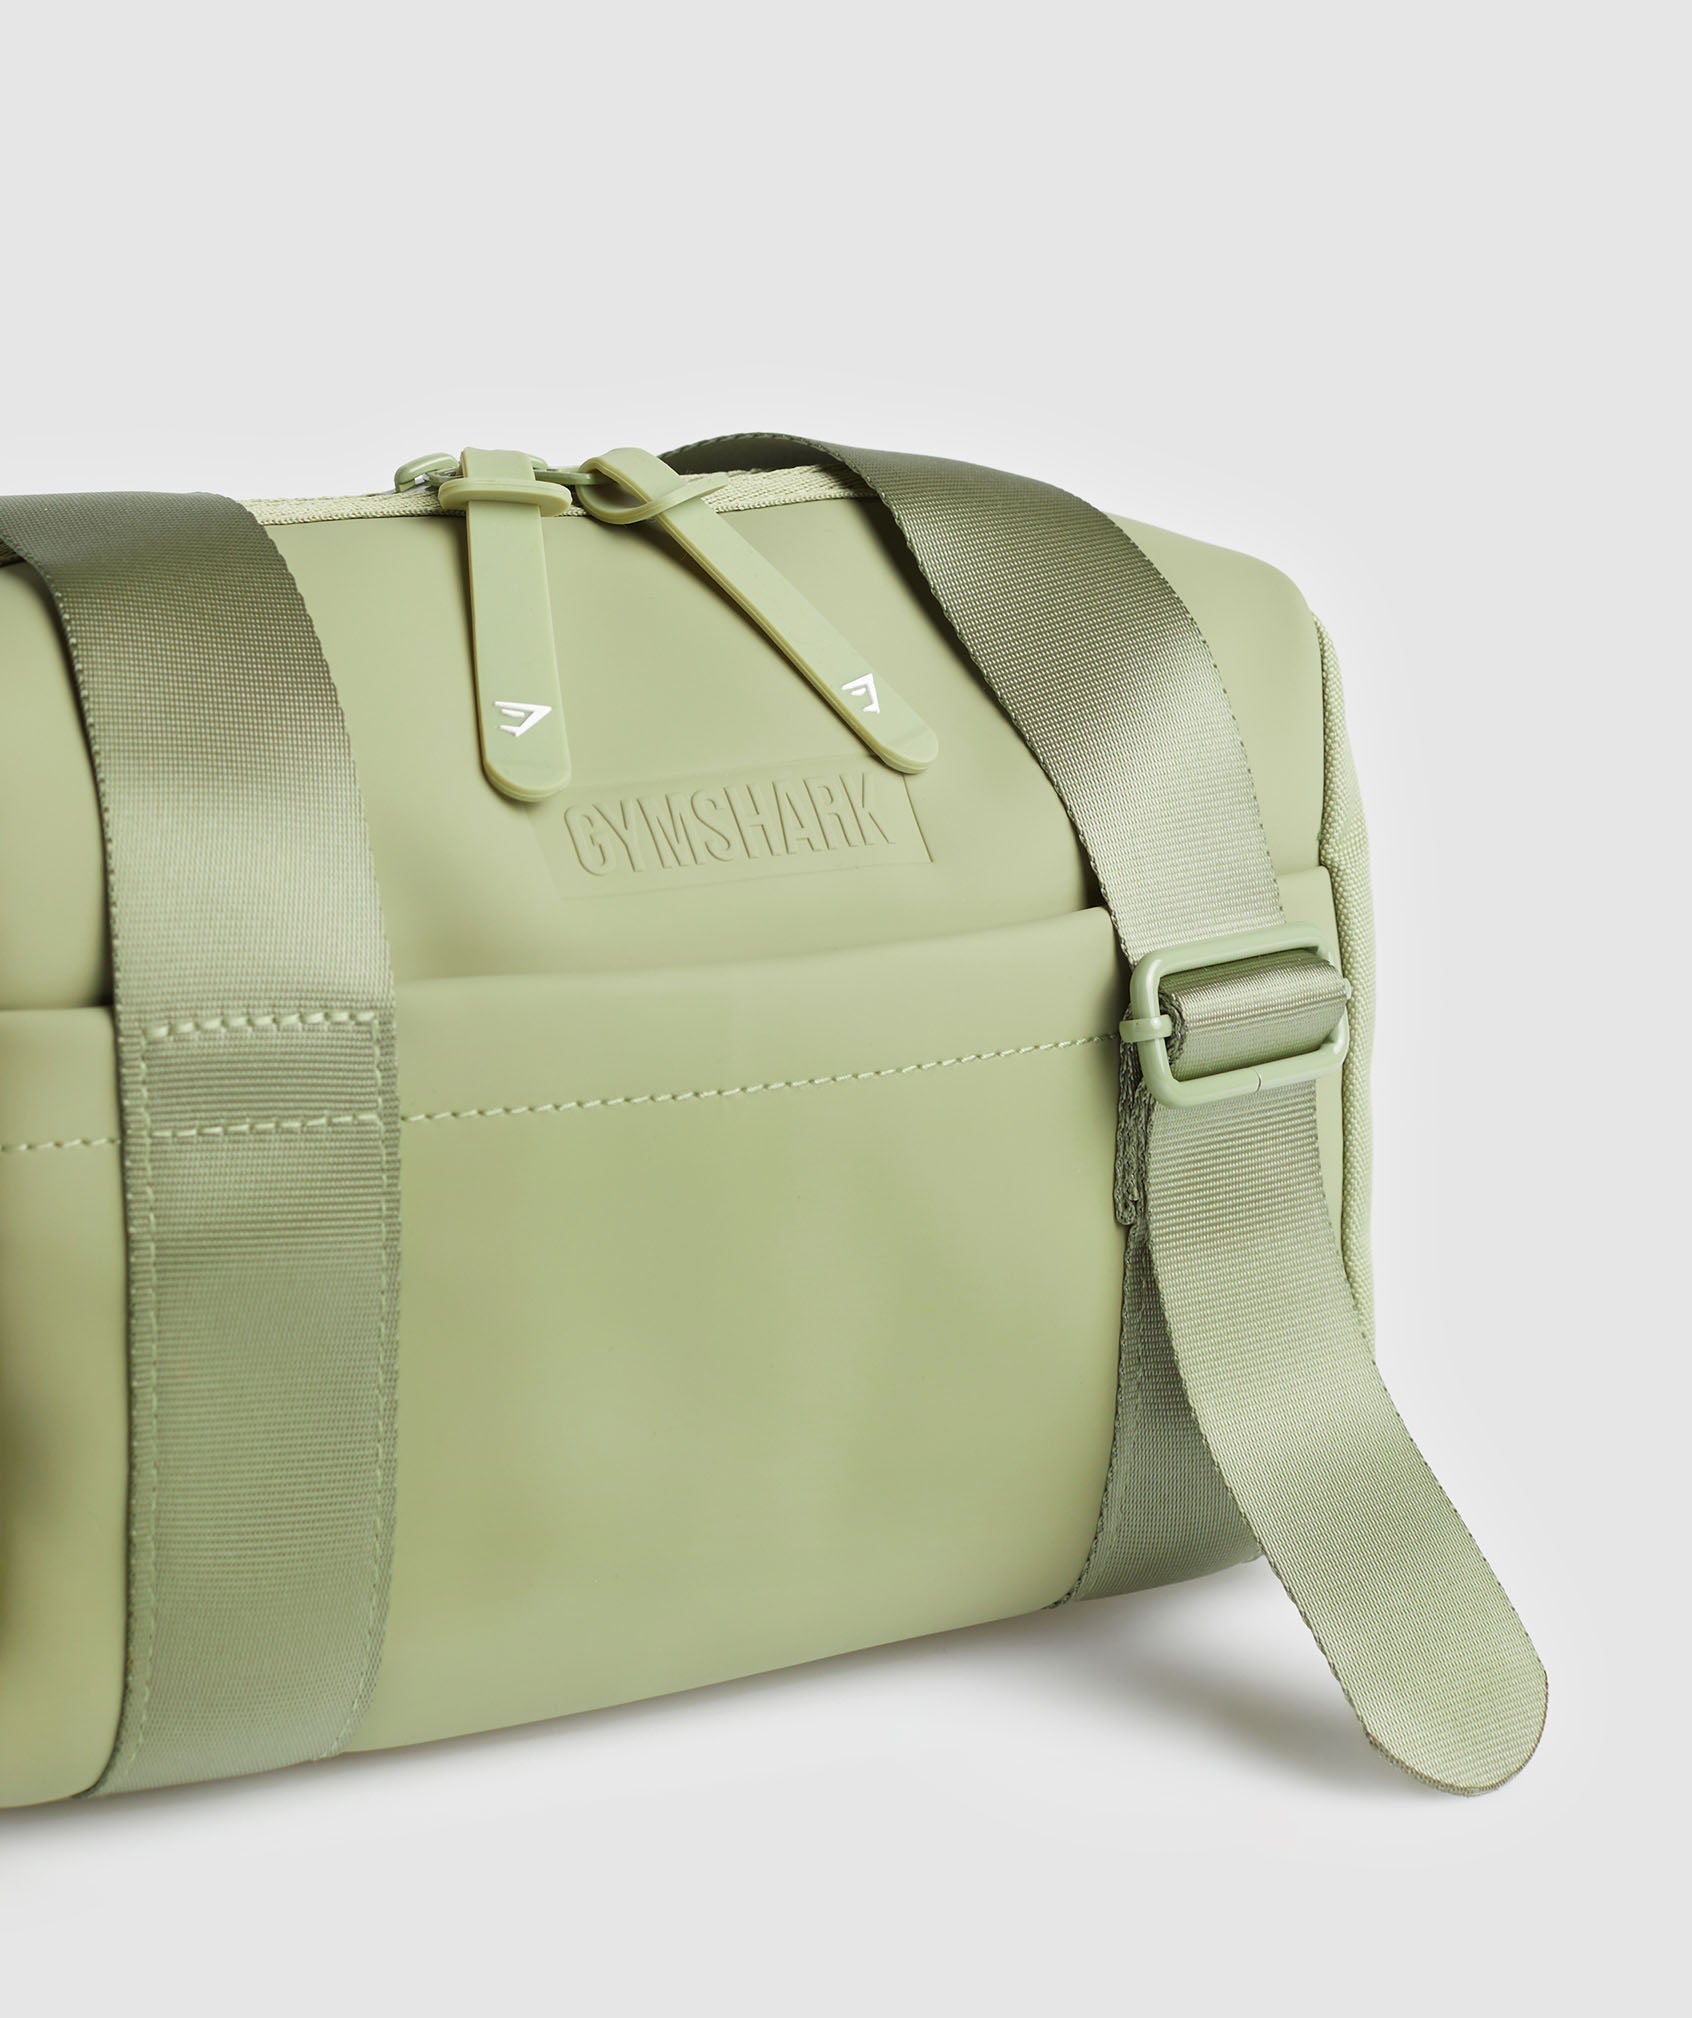 Everyday Mini Gym Bag in Natural Sage Green - view 4